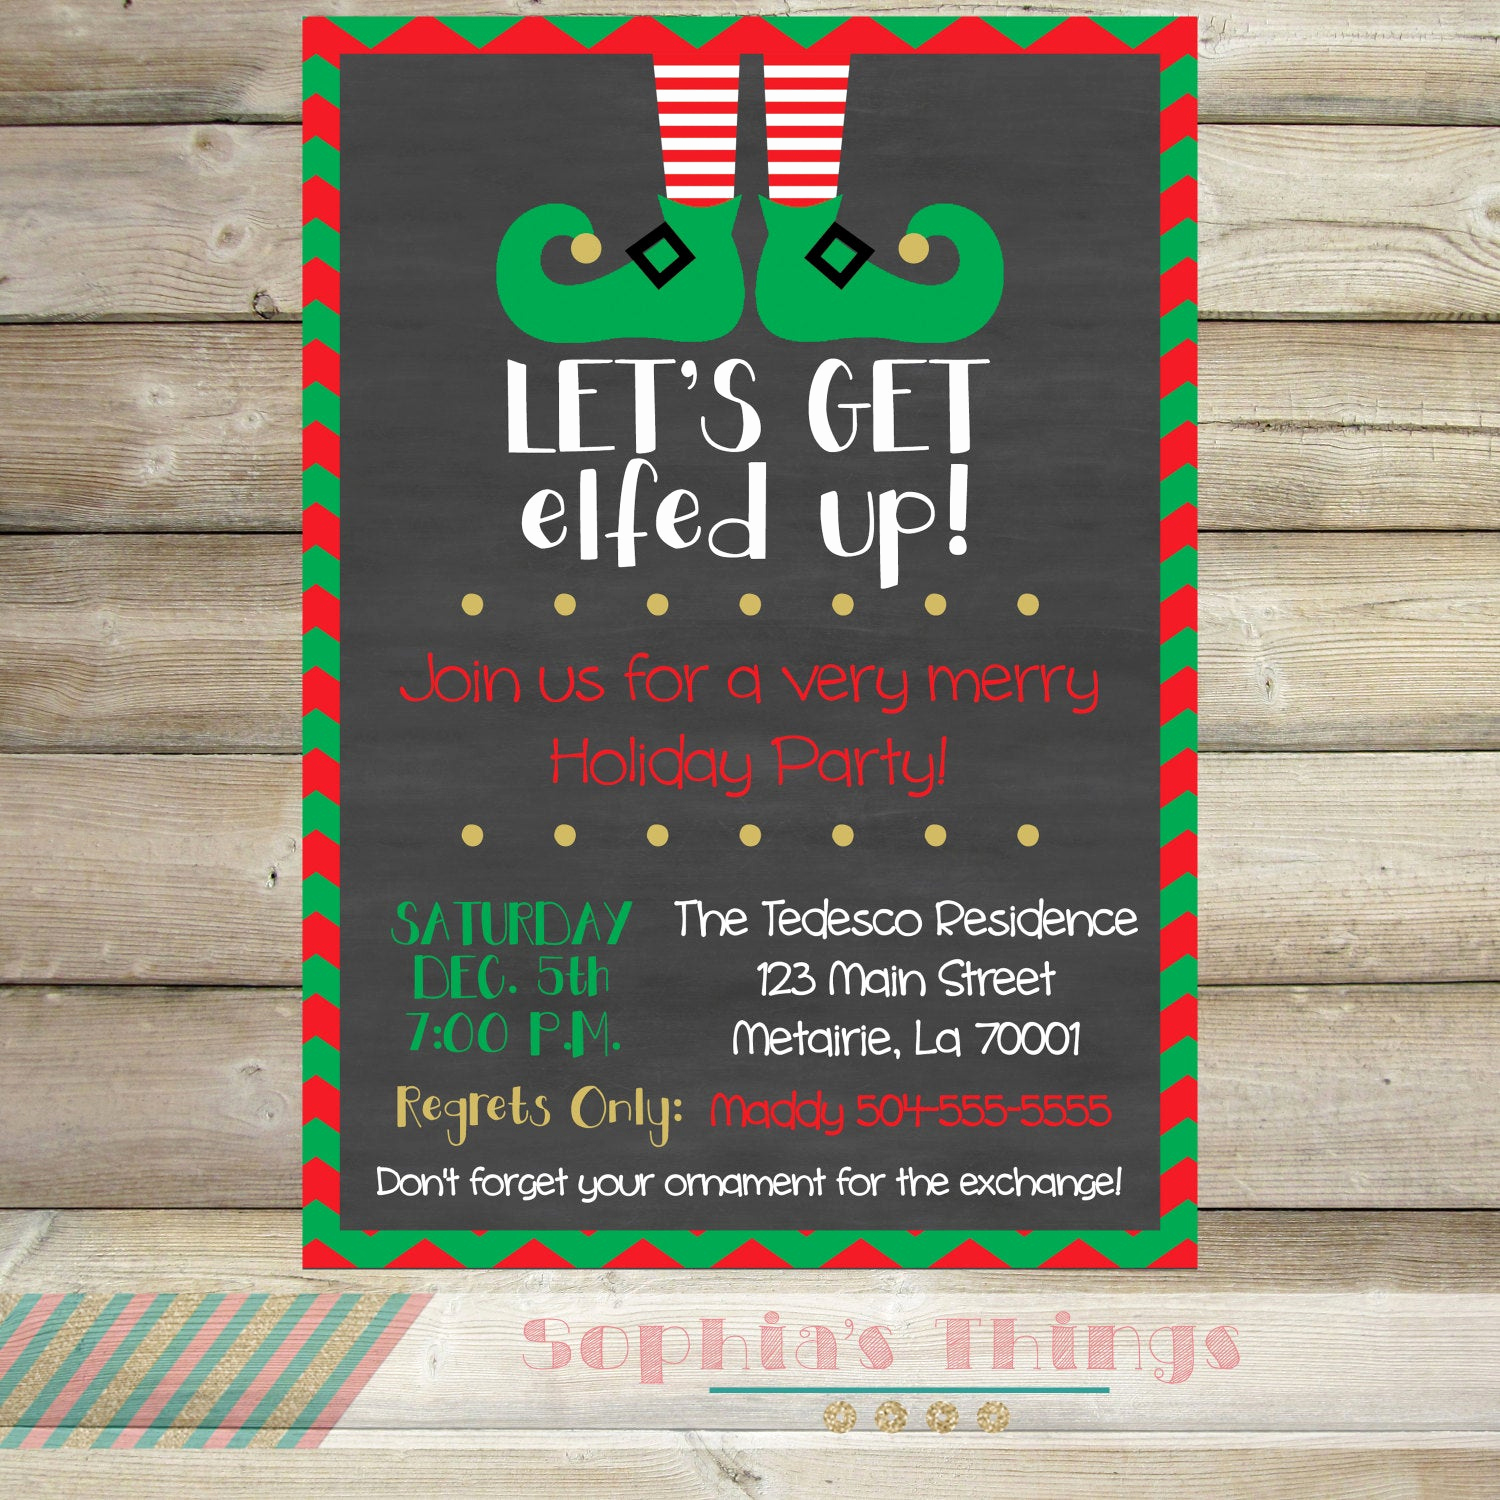 Work Christmas Party Invitation Fresh Let S Get Elfed Up Christmas Party Invitation Holiday